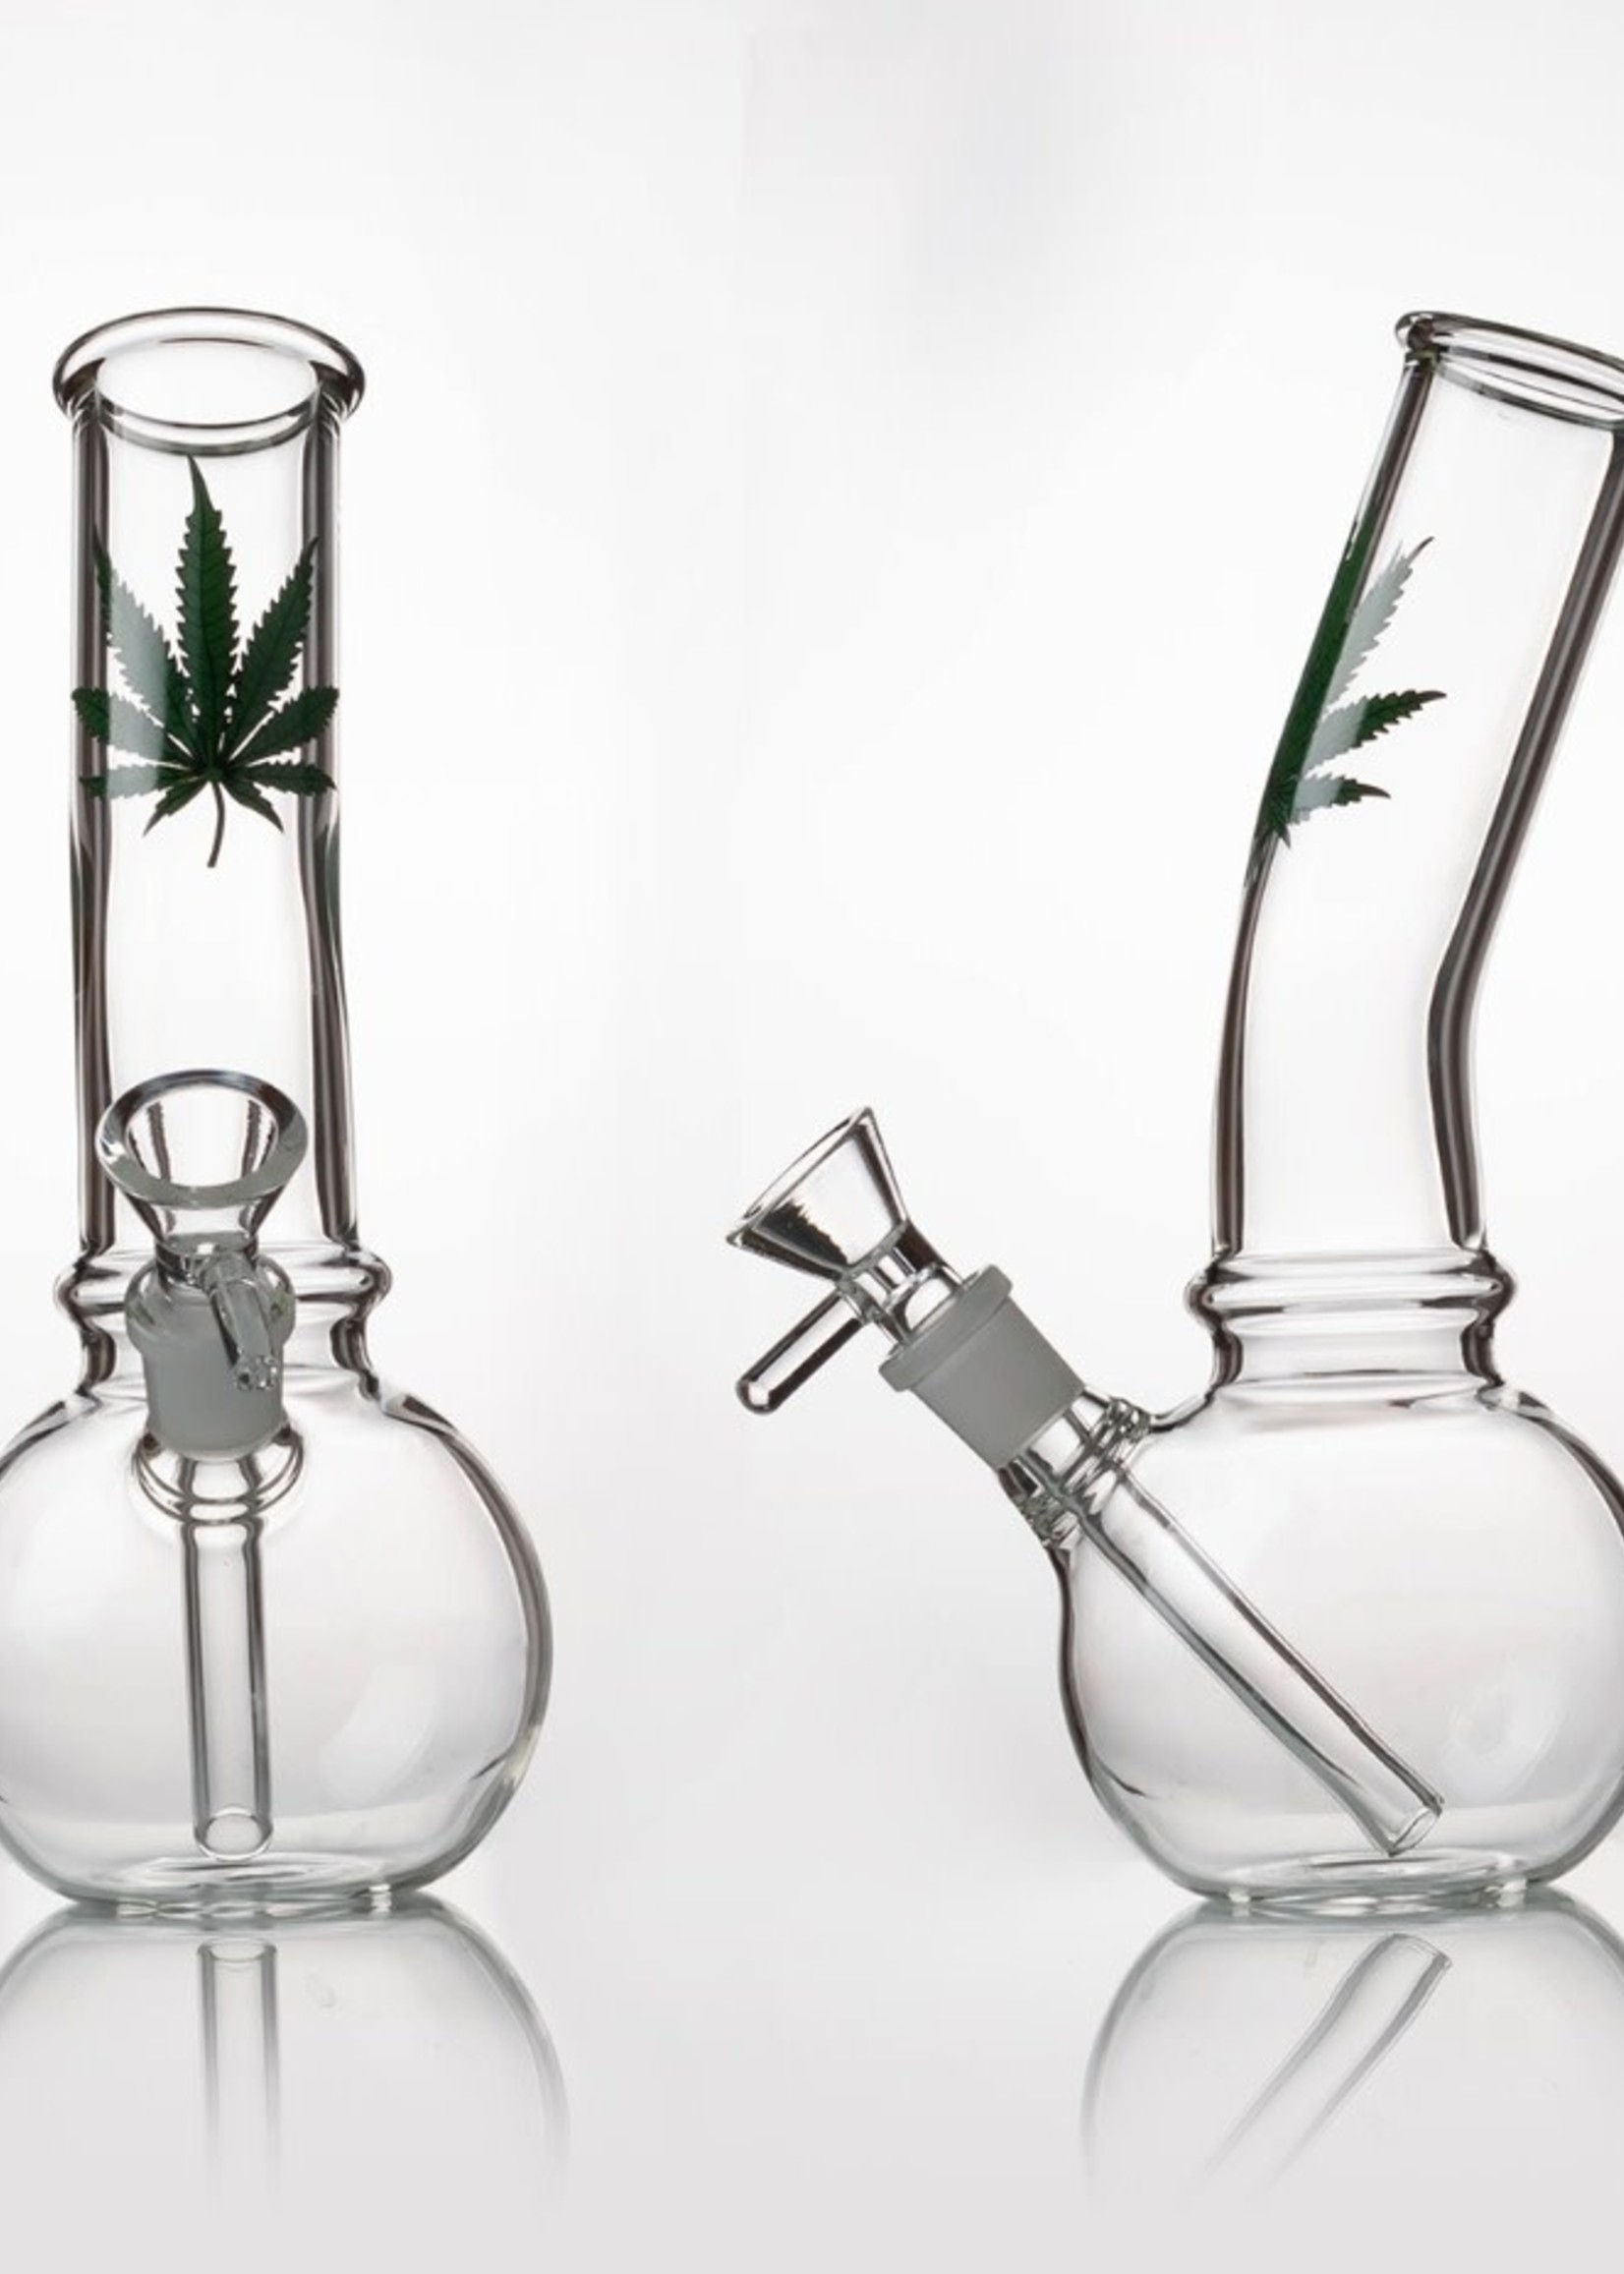 420 8" Glass Bong with leaf